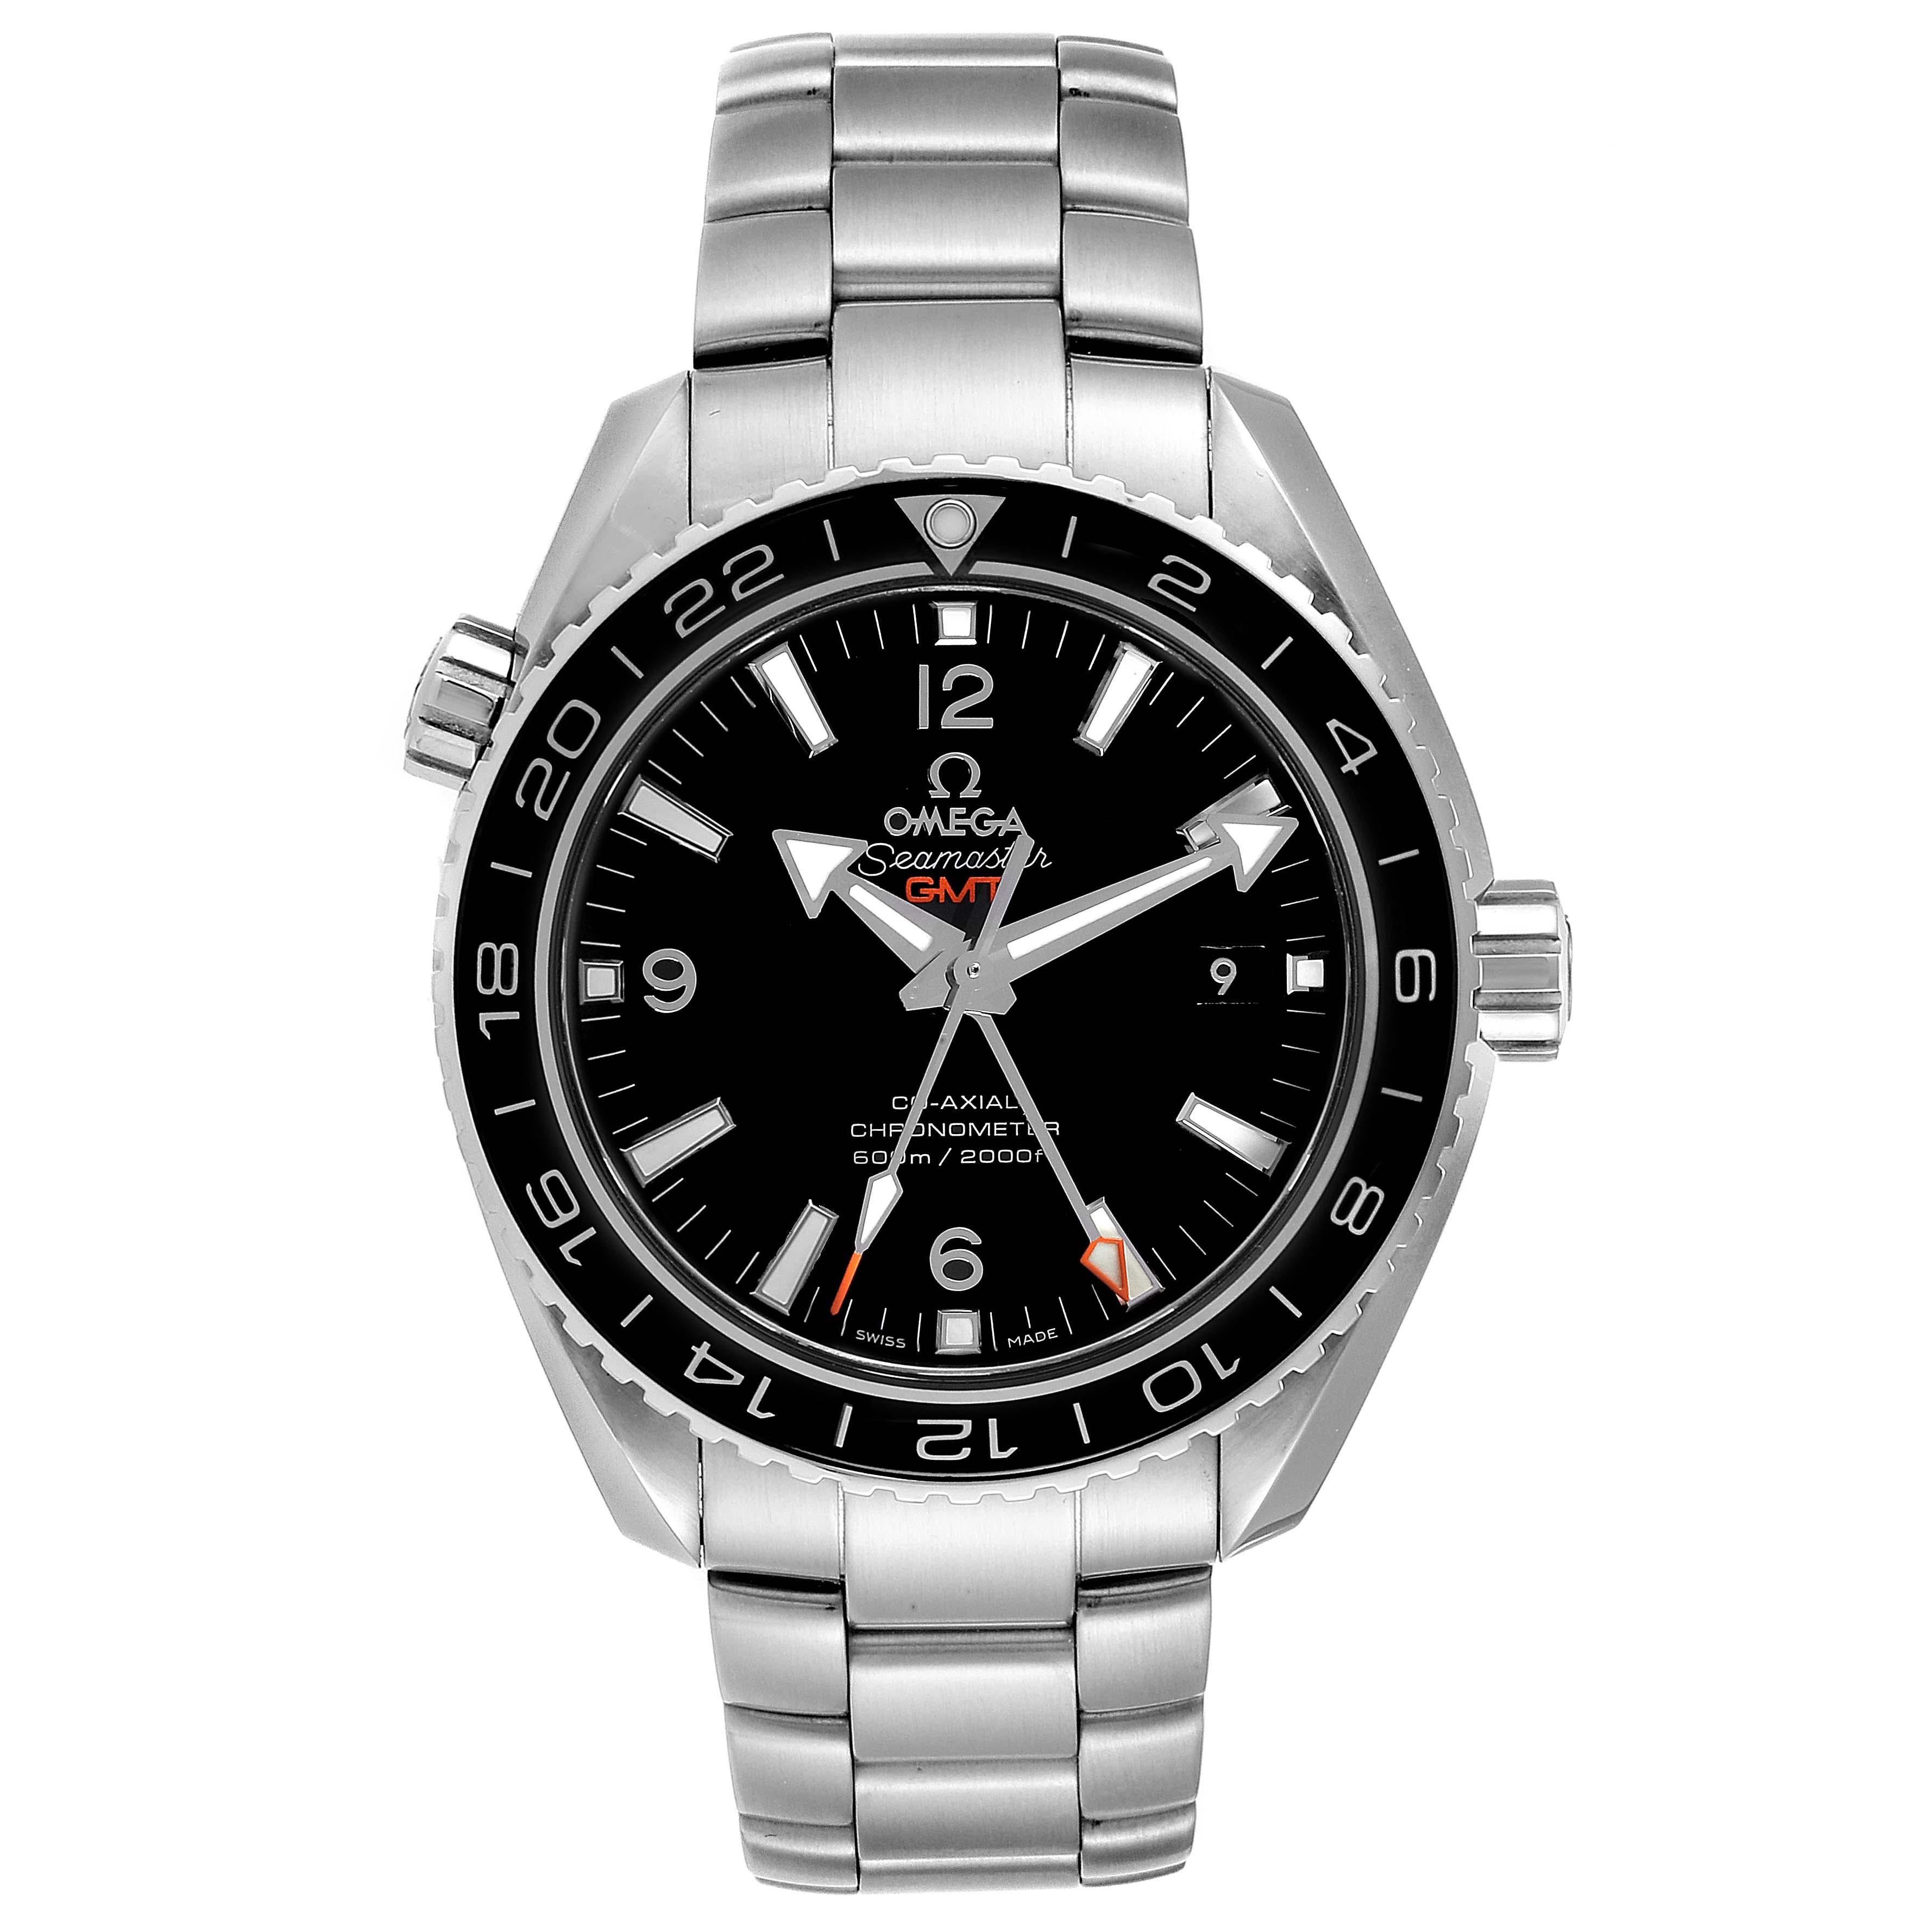 Omega Seamaster Planet Ocean GMT Watch 232.30.44.22.01.001 Box Card. Automatic self-winding chronometer movement with Co-Axial Escapement for greater precision, stability and durability. GMT with time zone function. Silicon balance-spring on free